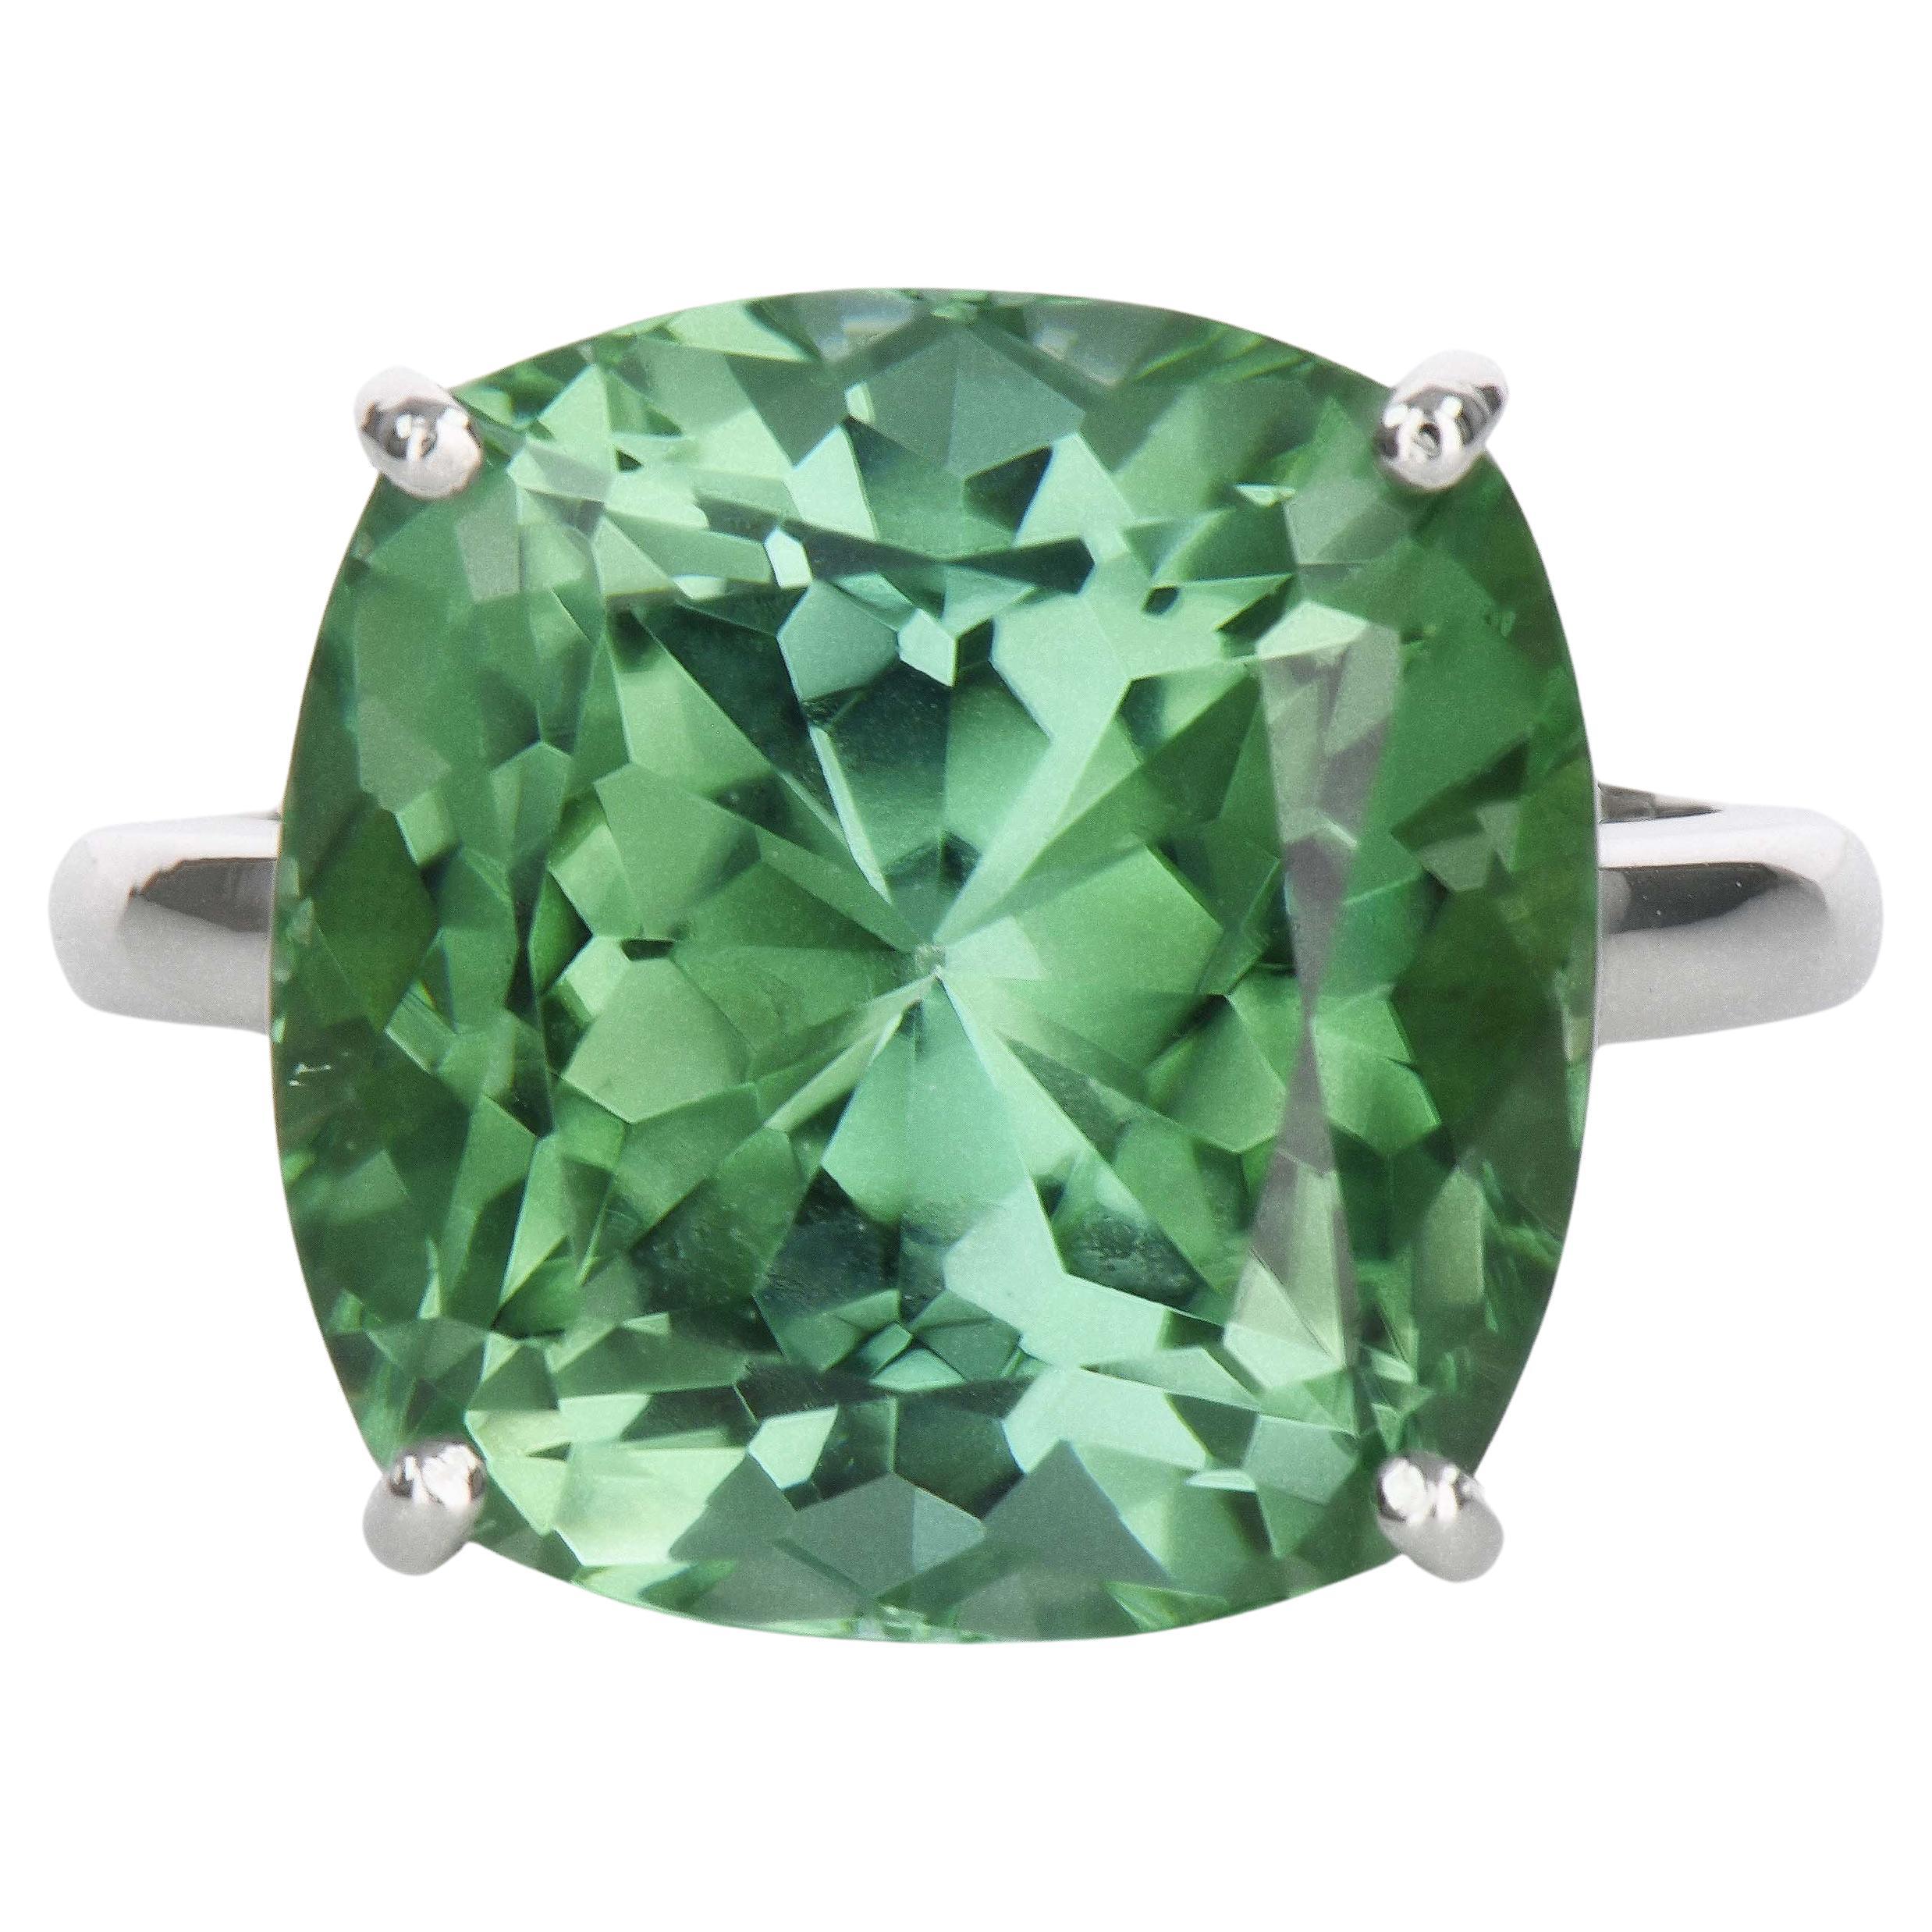 14.06ct Mint Green Tourmaline, Cushion Cut, 18KT White Gold, GIA Certified-Rare For Sale